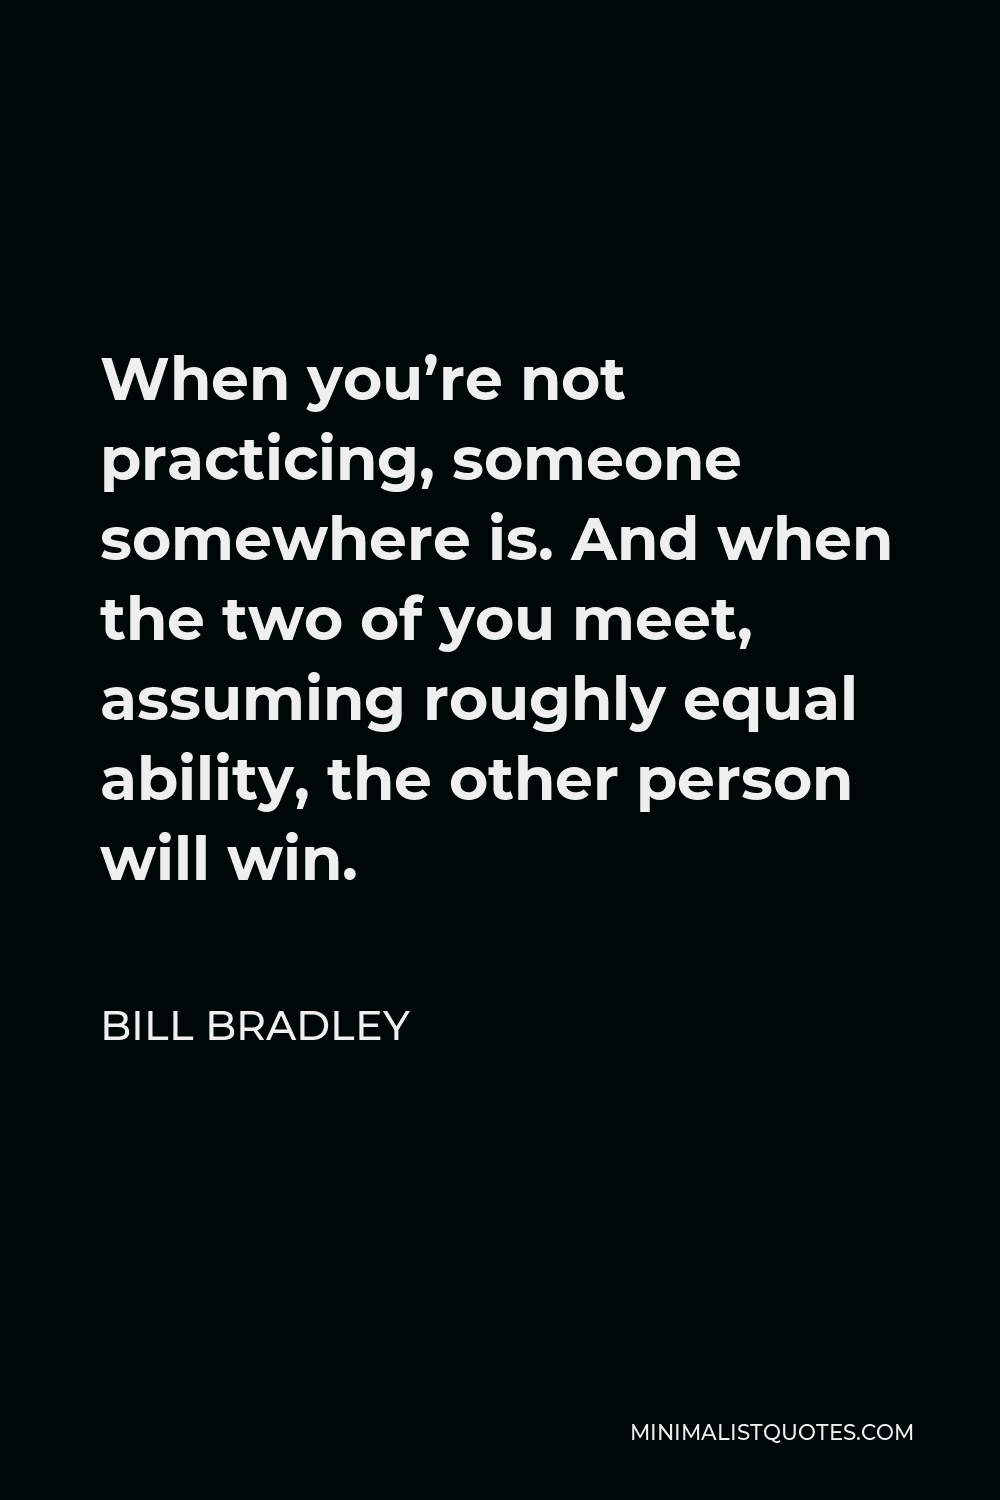 Bill Bradley Quote - When you’re not practicing, someone somewhere is. And when the two of you meet, assuming roughly equal ability, the other person will win.